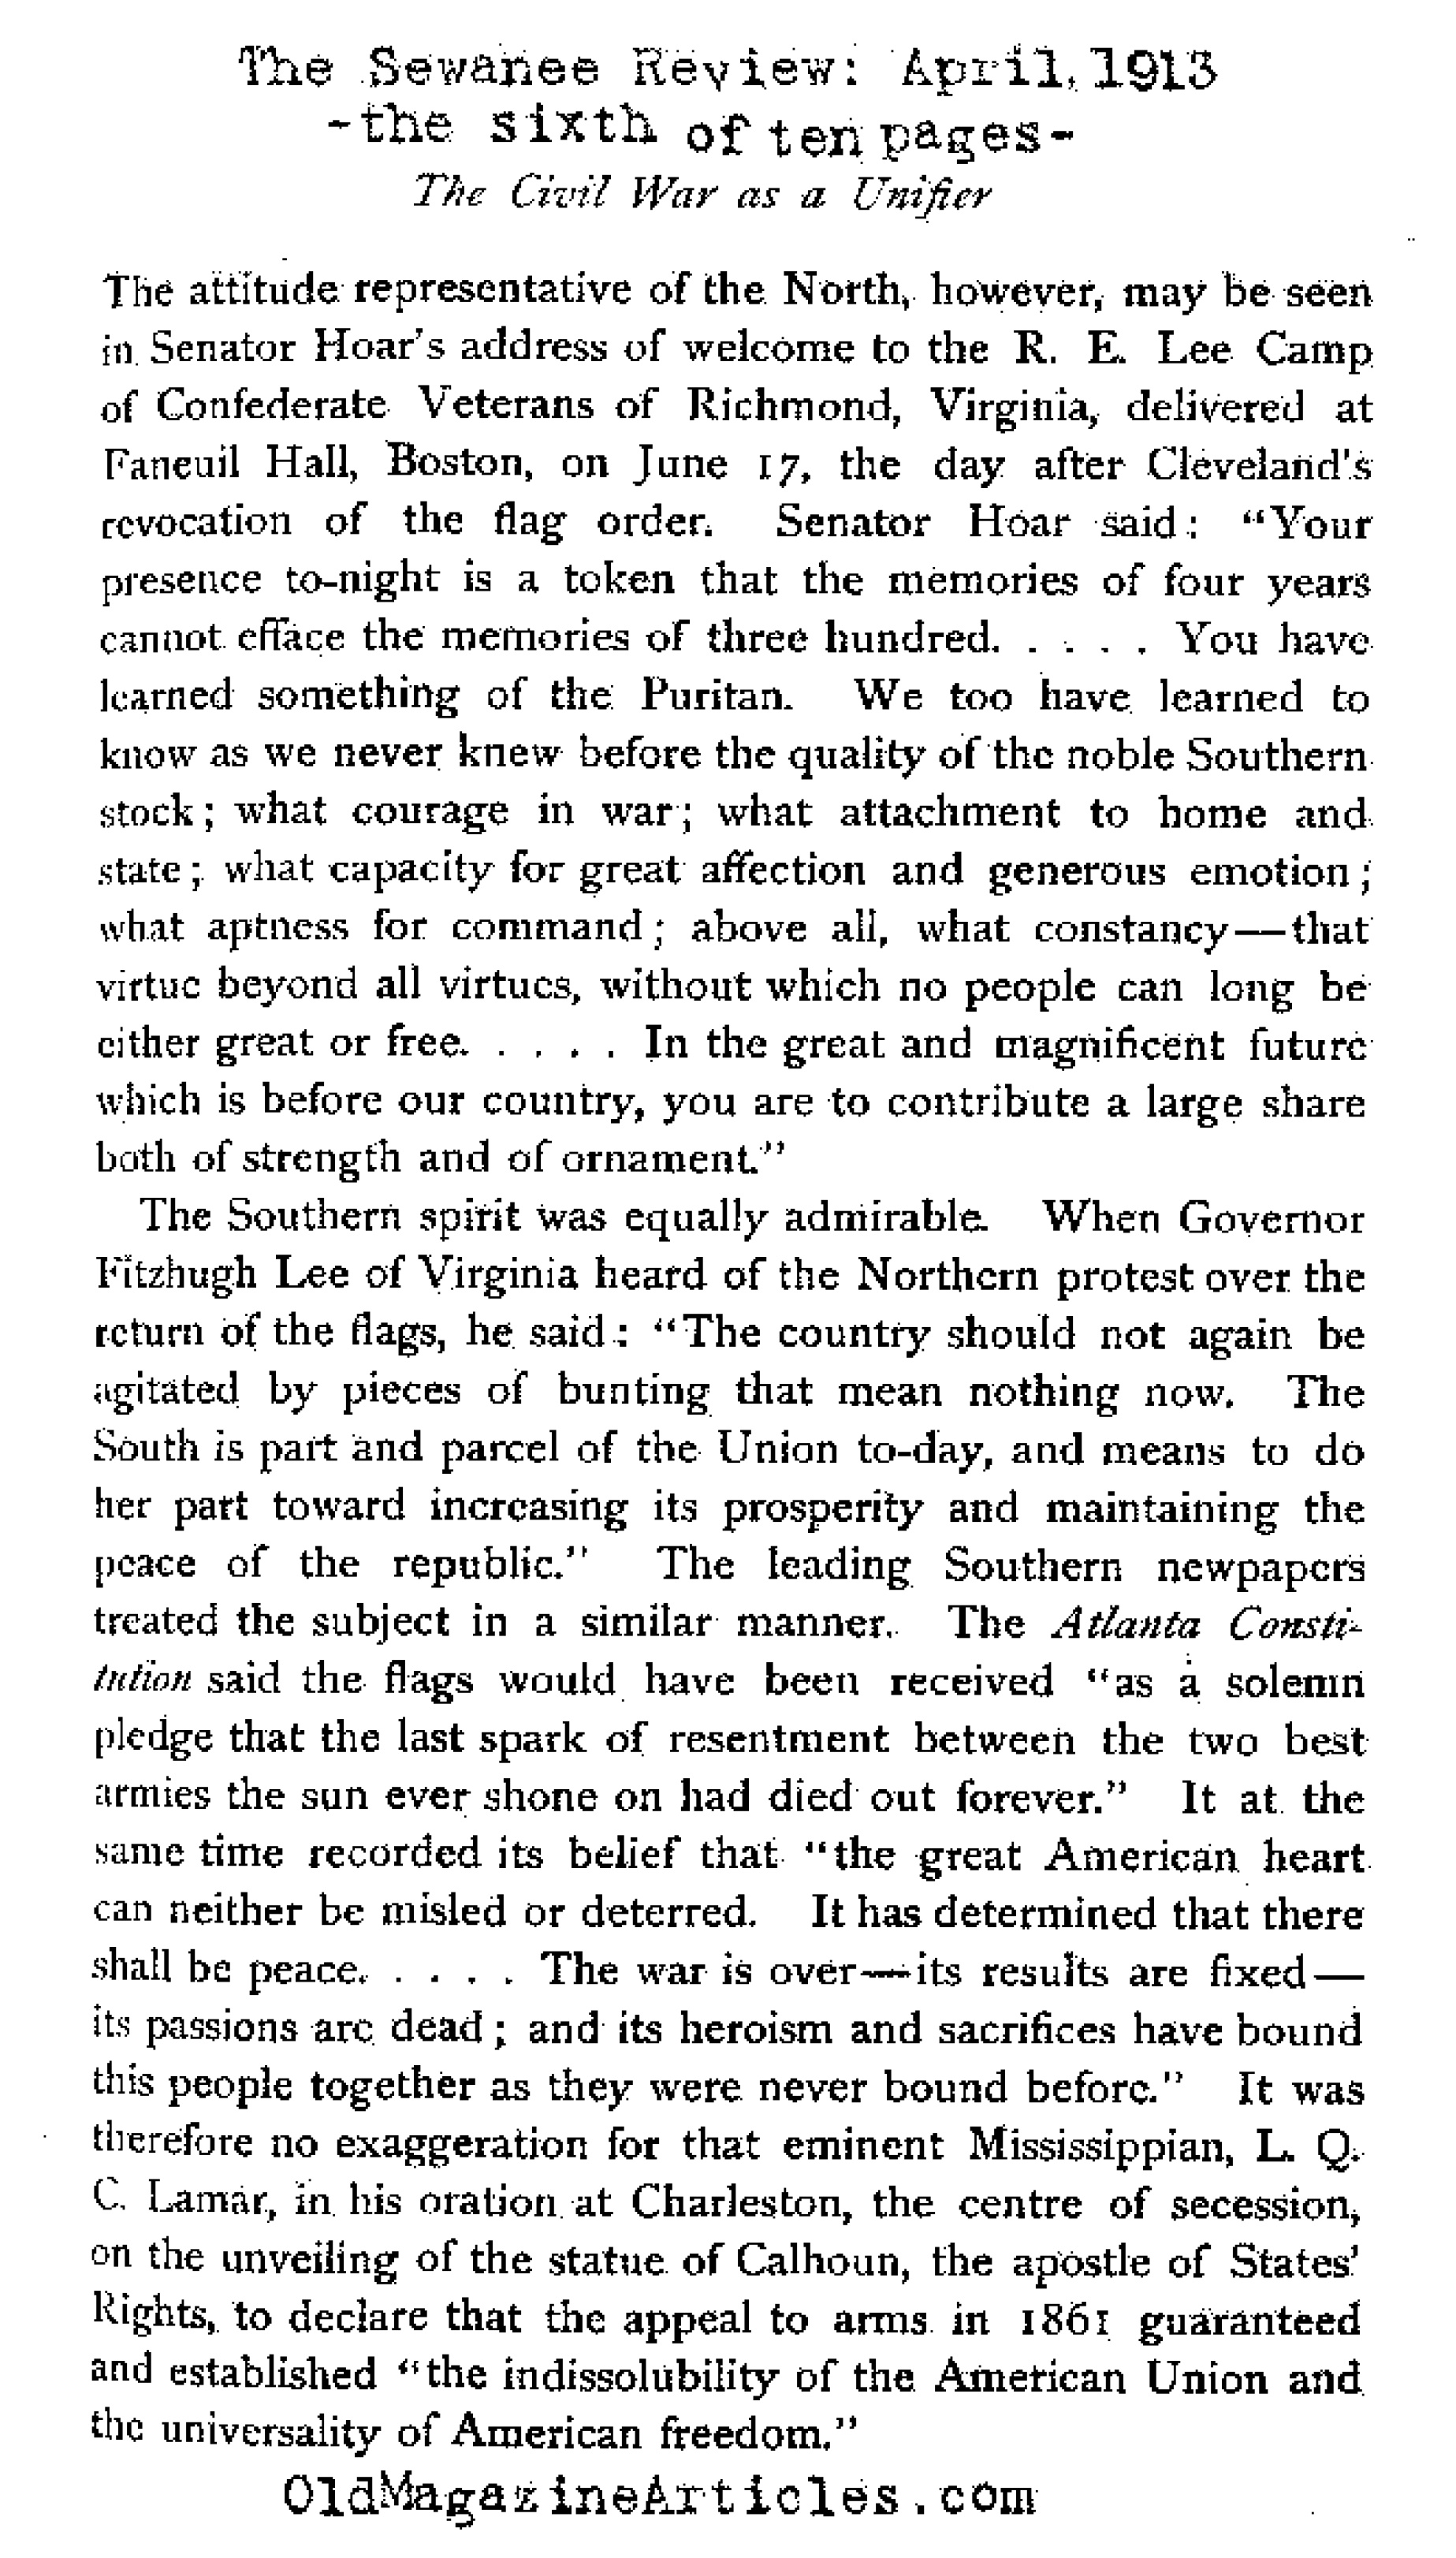 The American Civil War and the Unity it Created (The Sewanee Review, 1913)